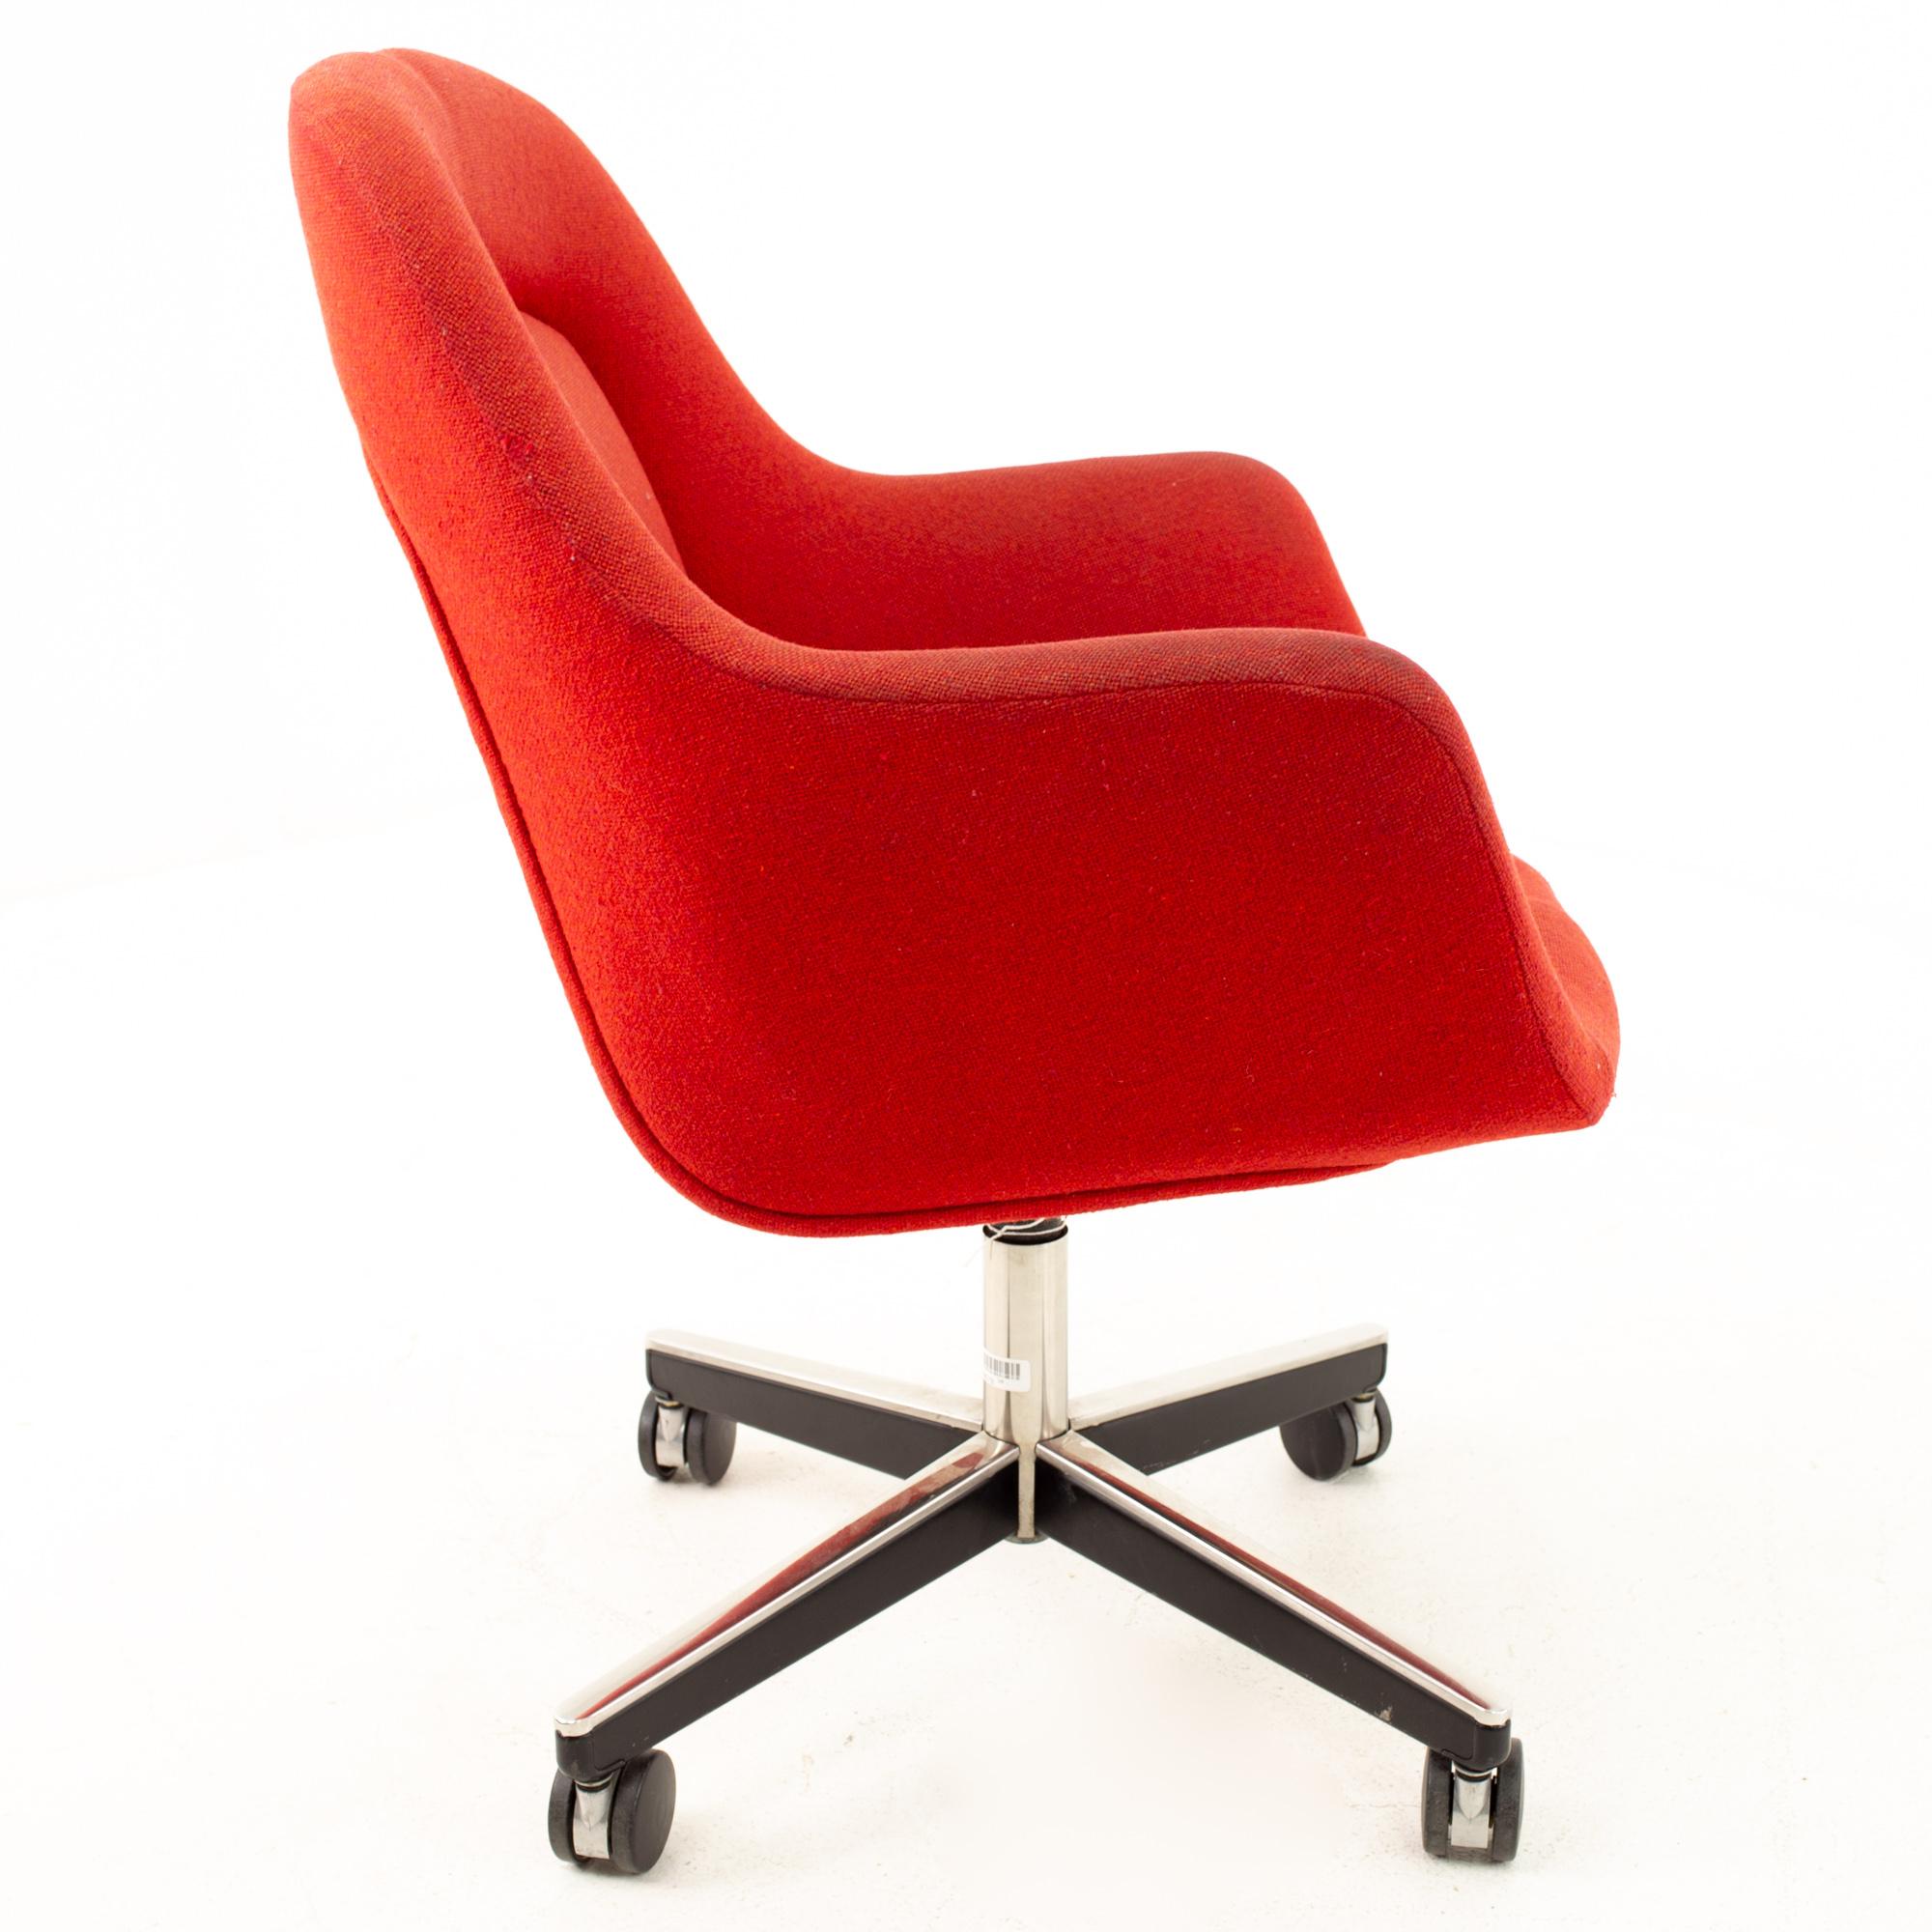 Max Pearson for Knoll mid century red upholstered office desk chair
Chair measures: 26 wide x 24 deep x 34 high with a seat height of 25 inches

This piece is available in what we call restored vintage condition. Upon purchase it is thoroughly